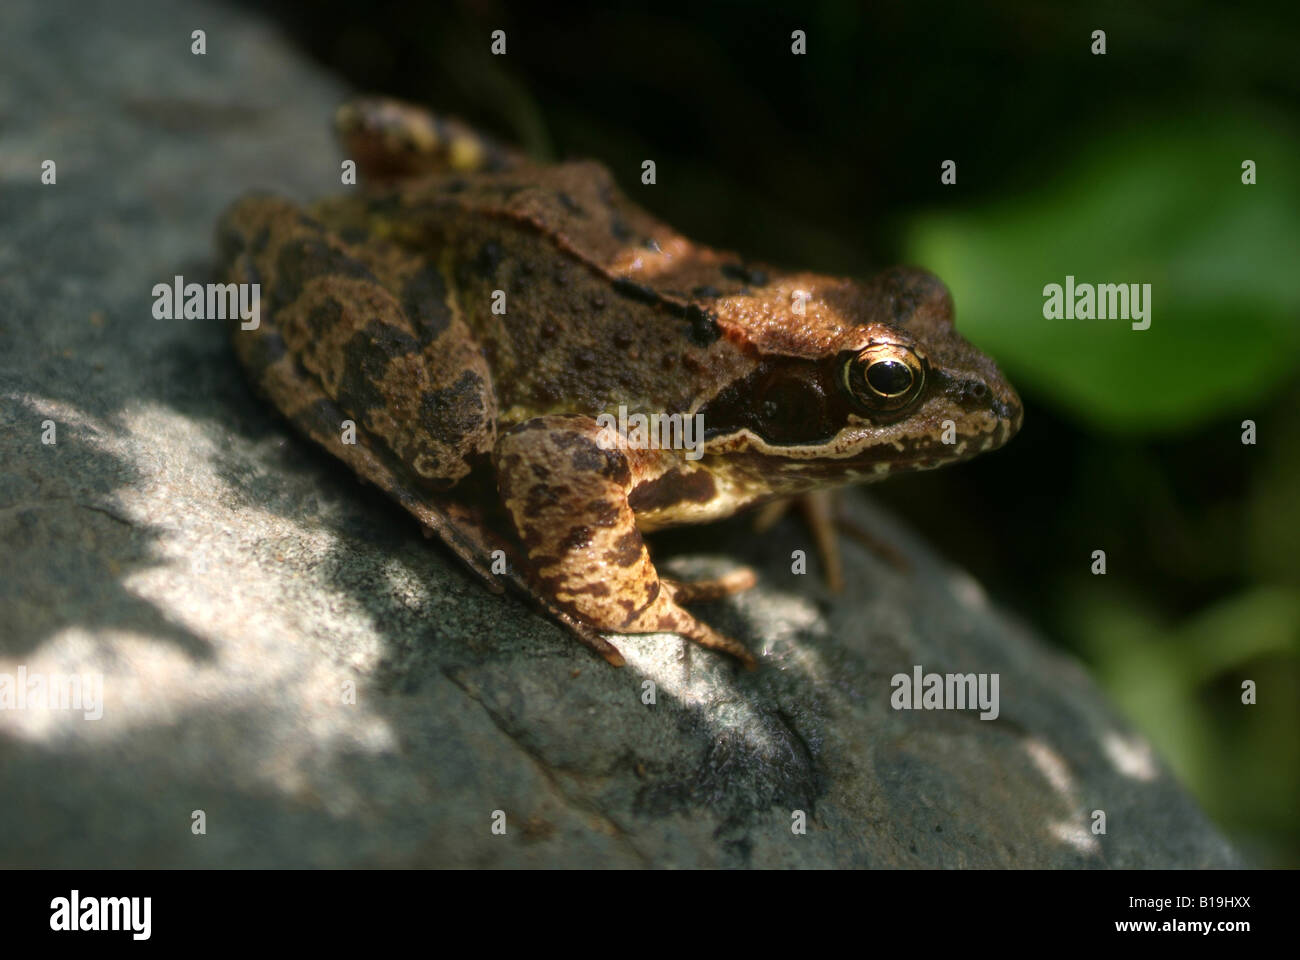 A Common Frog, Rana temporaria sitting on a stone in a garden. Stock Photo